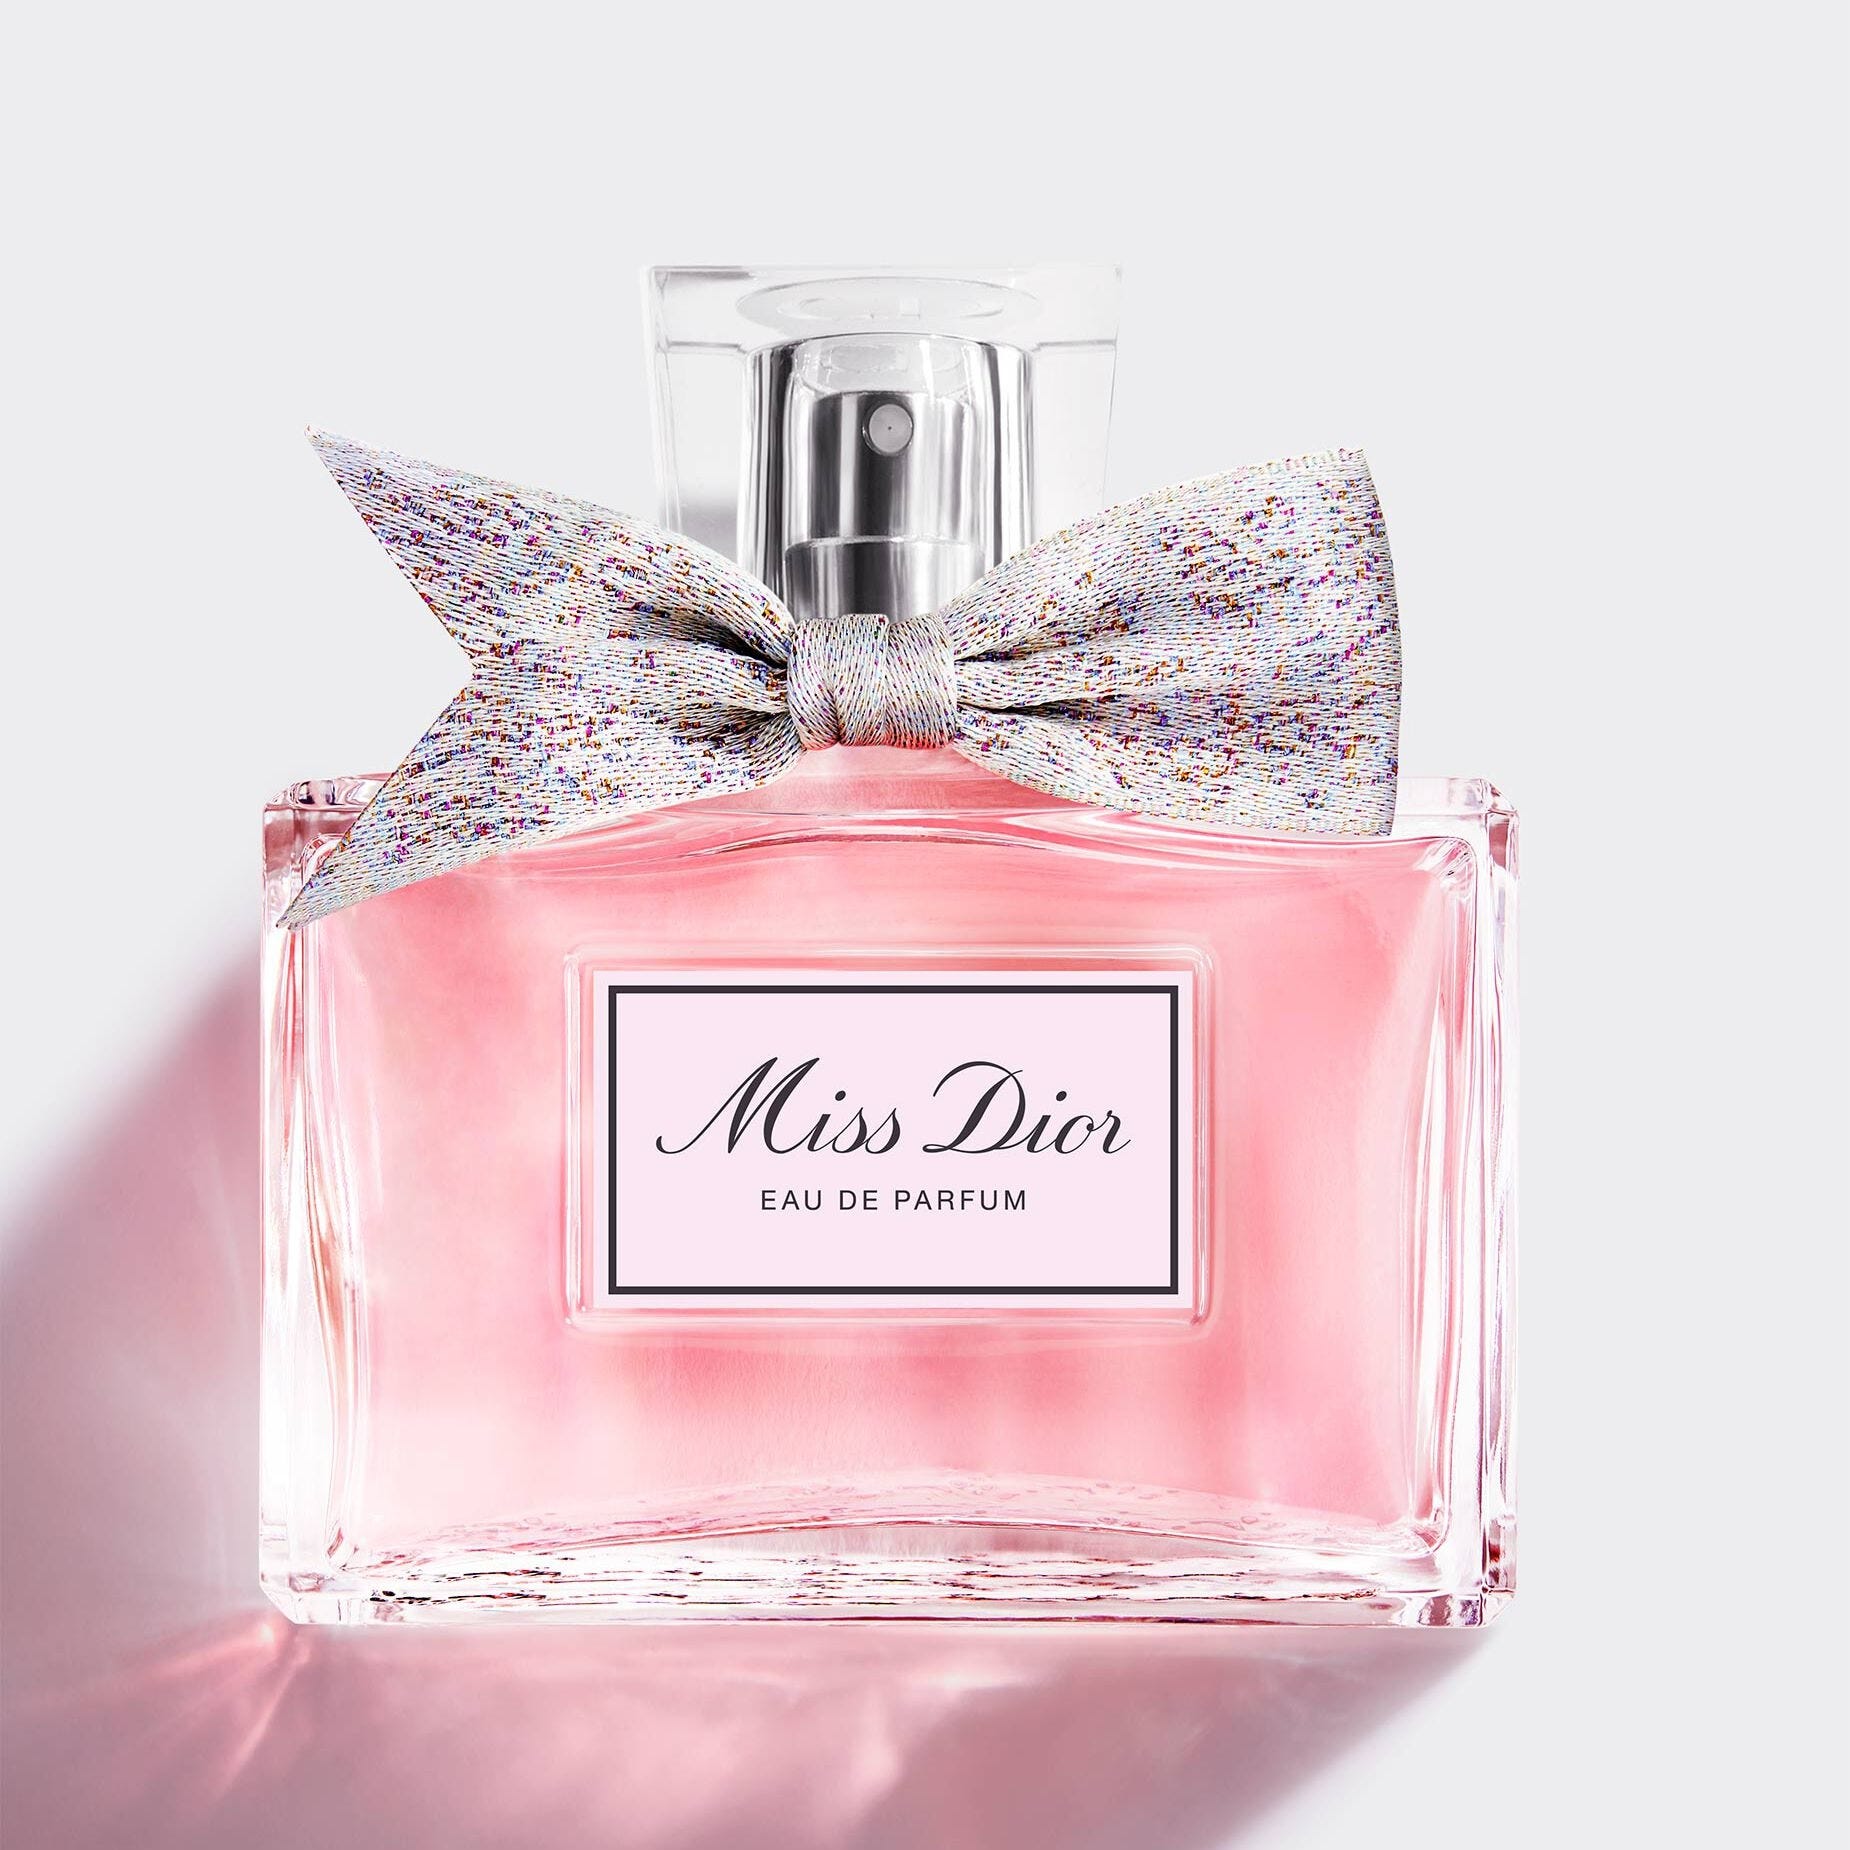 A square-shaped bottle of Miss Dior Eau de Parfum with pink liquid and a multi-colored bow.